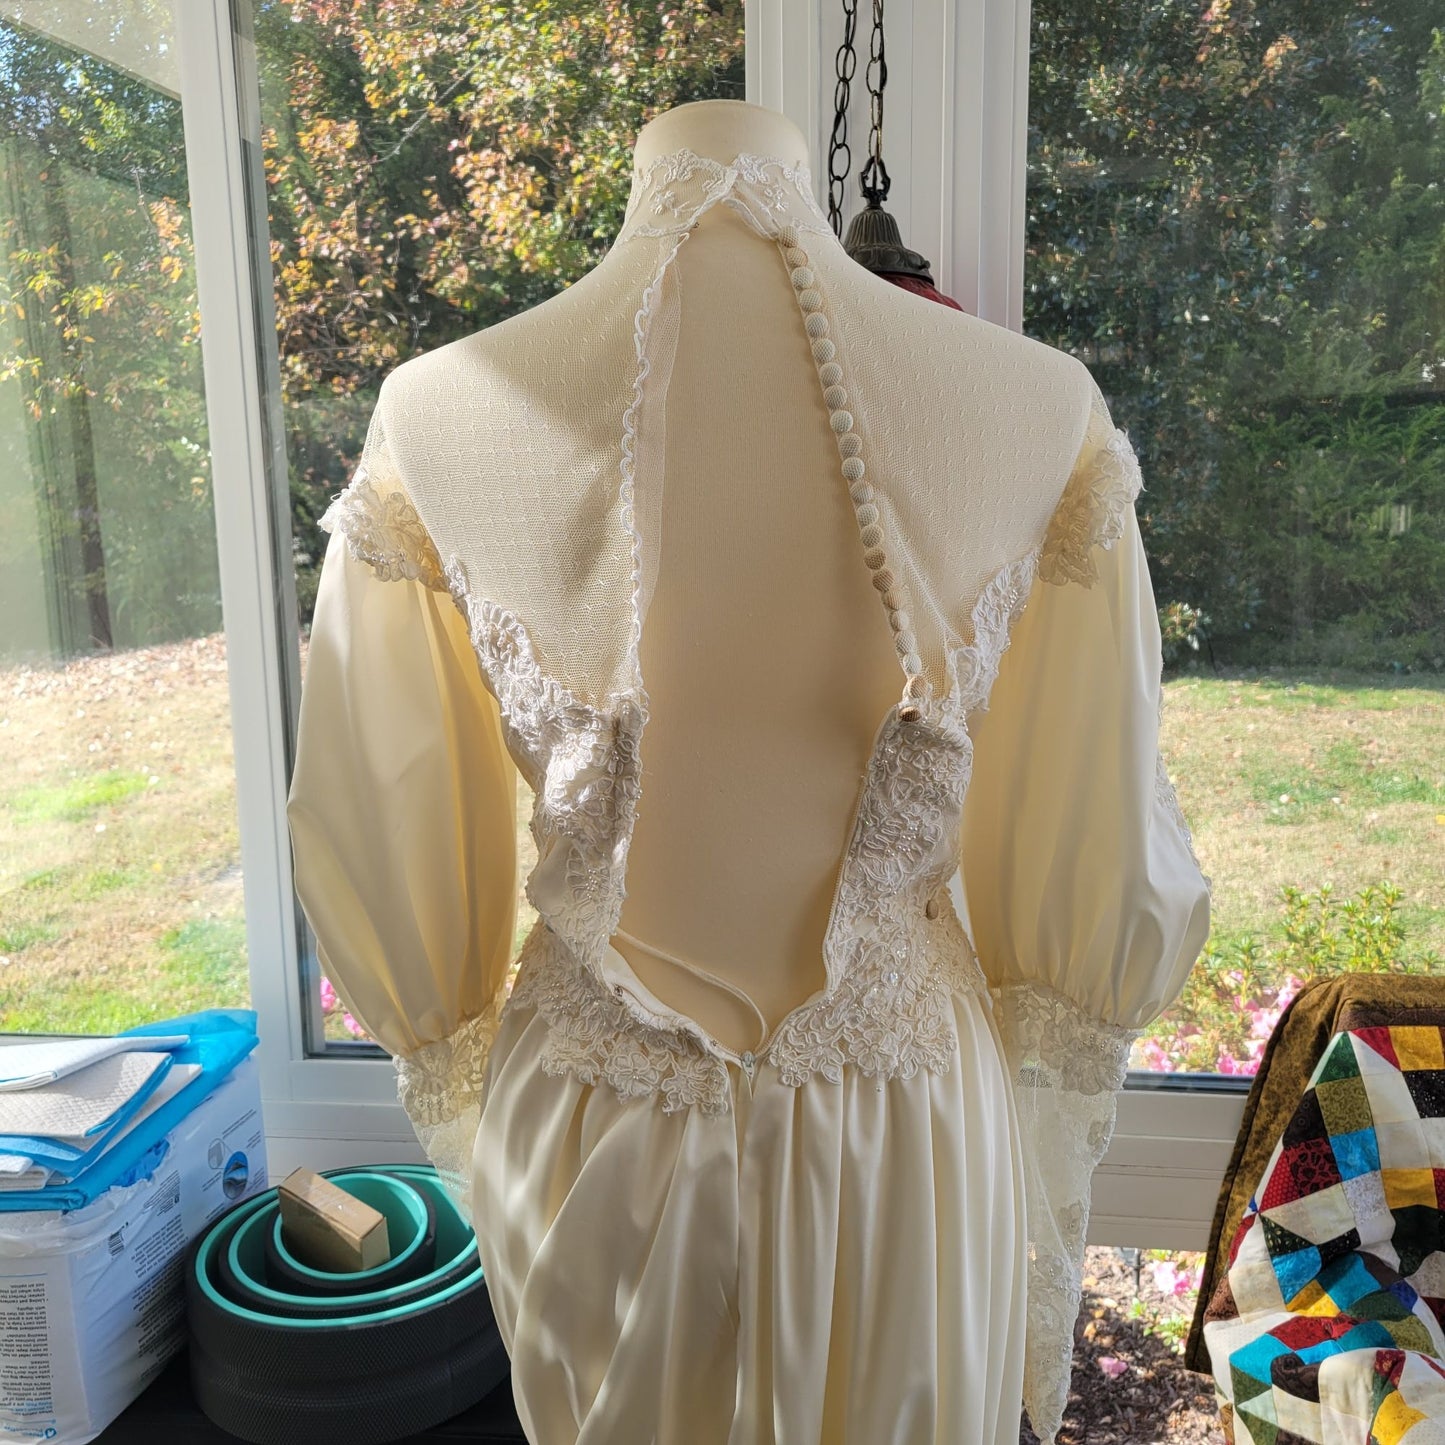 Fantastic Vintage Lace, Satin, Buttons, and puffy sleeves